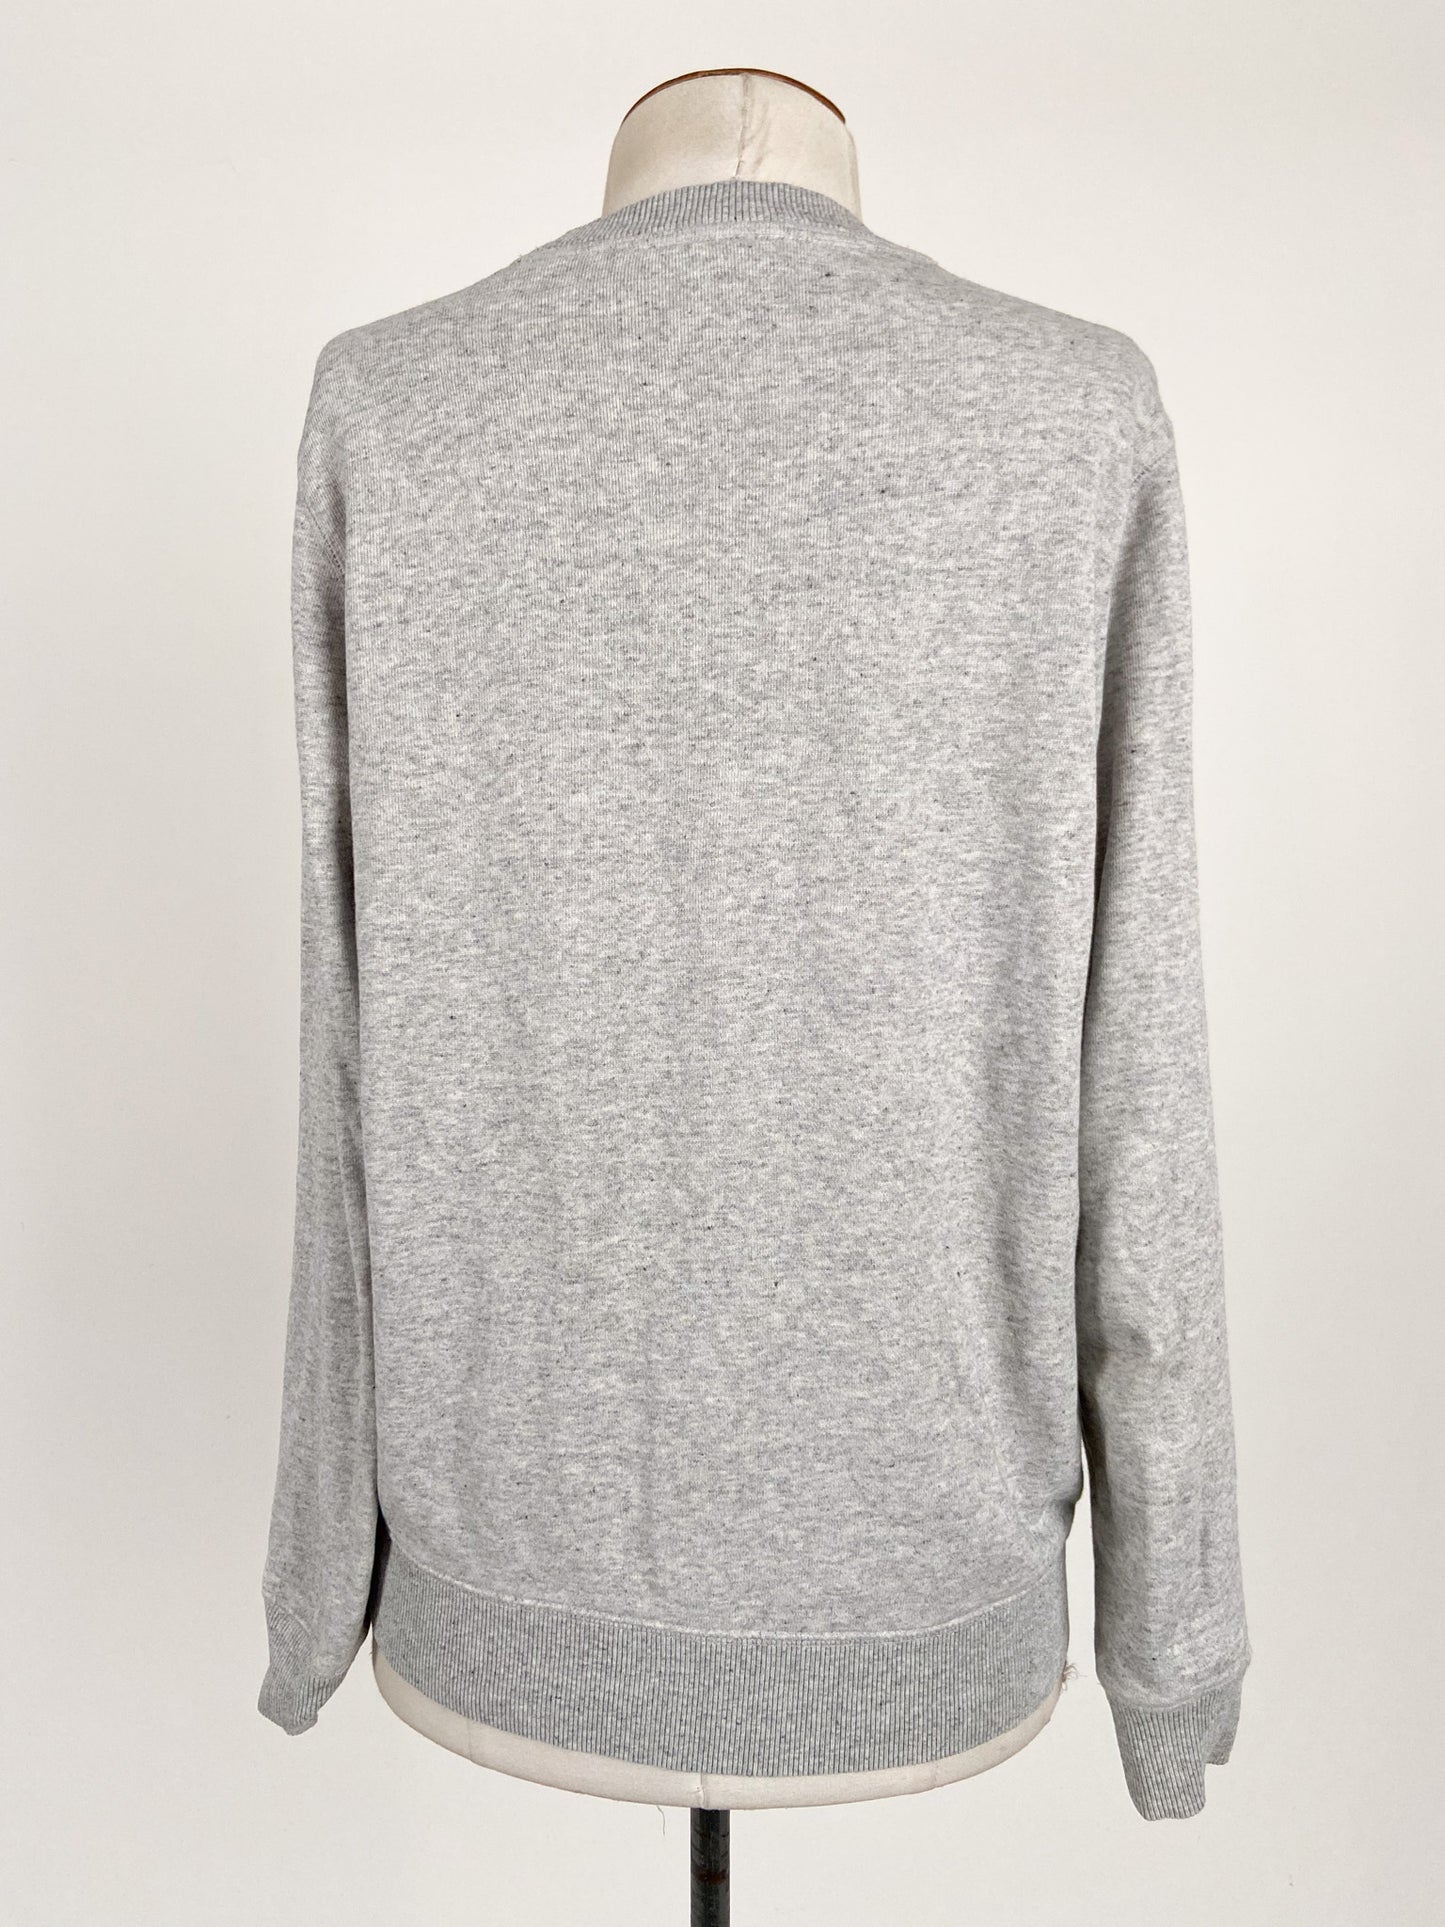 Lacoste | Grey Casual Jumper | Size XS